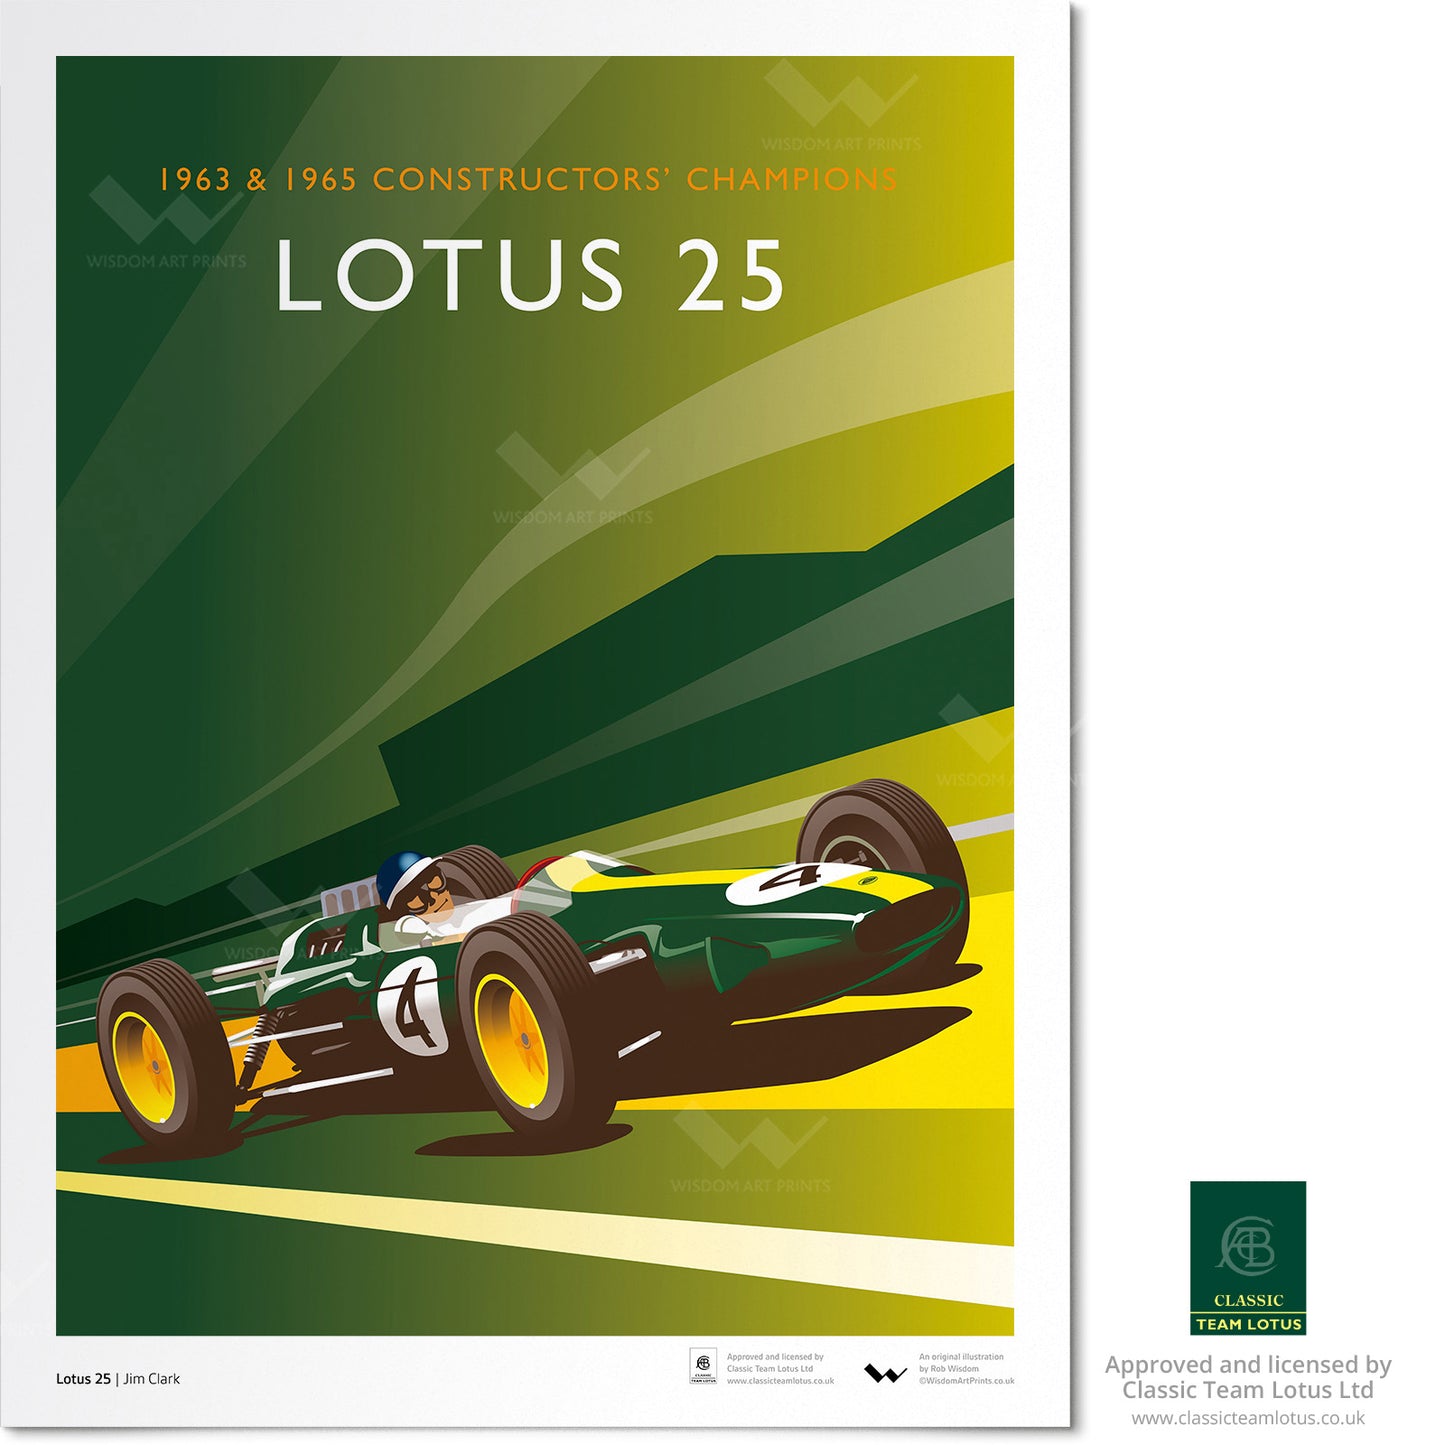 Illustration of the Lotus 25, as driven by Jim Clark